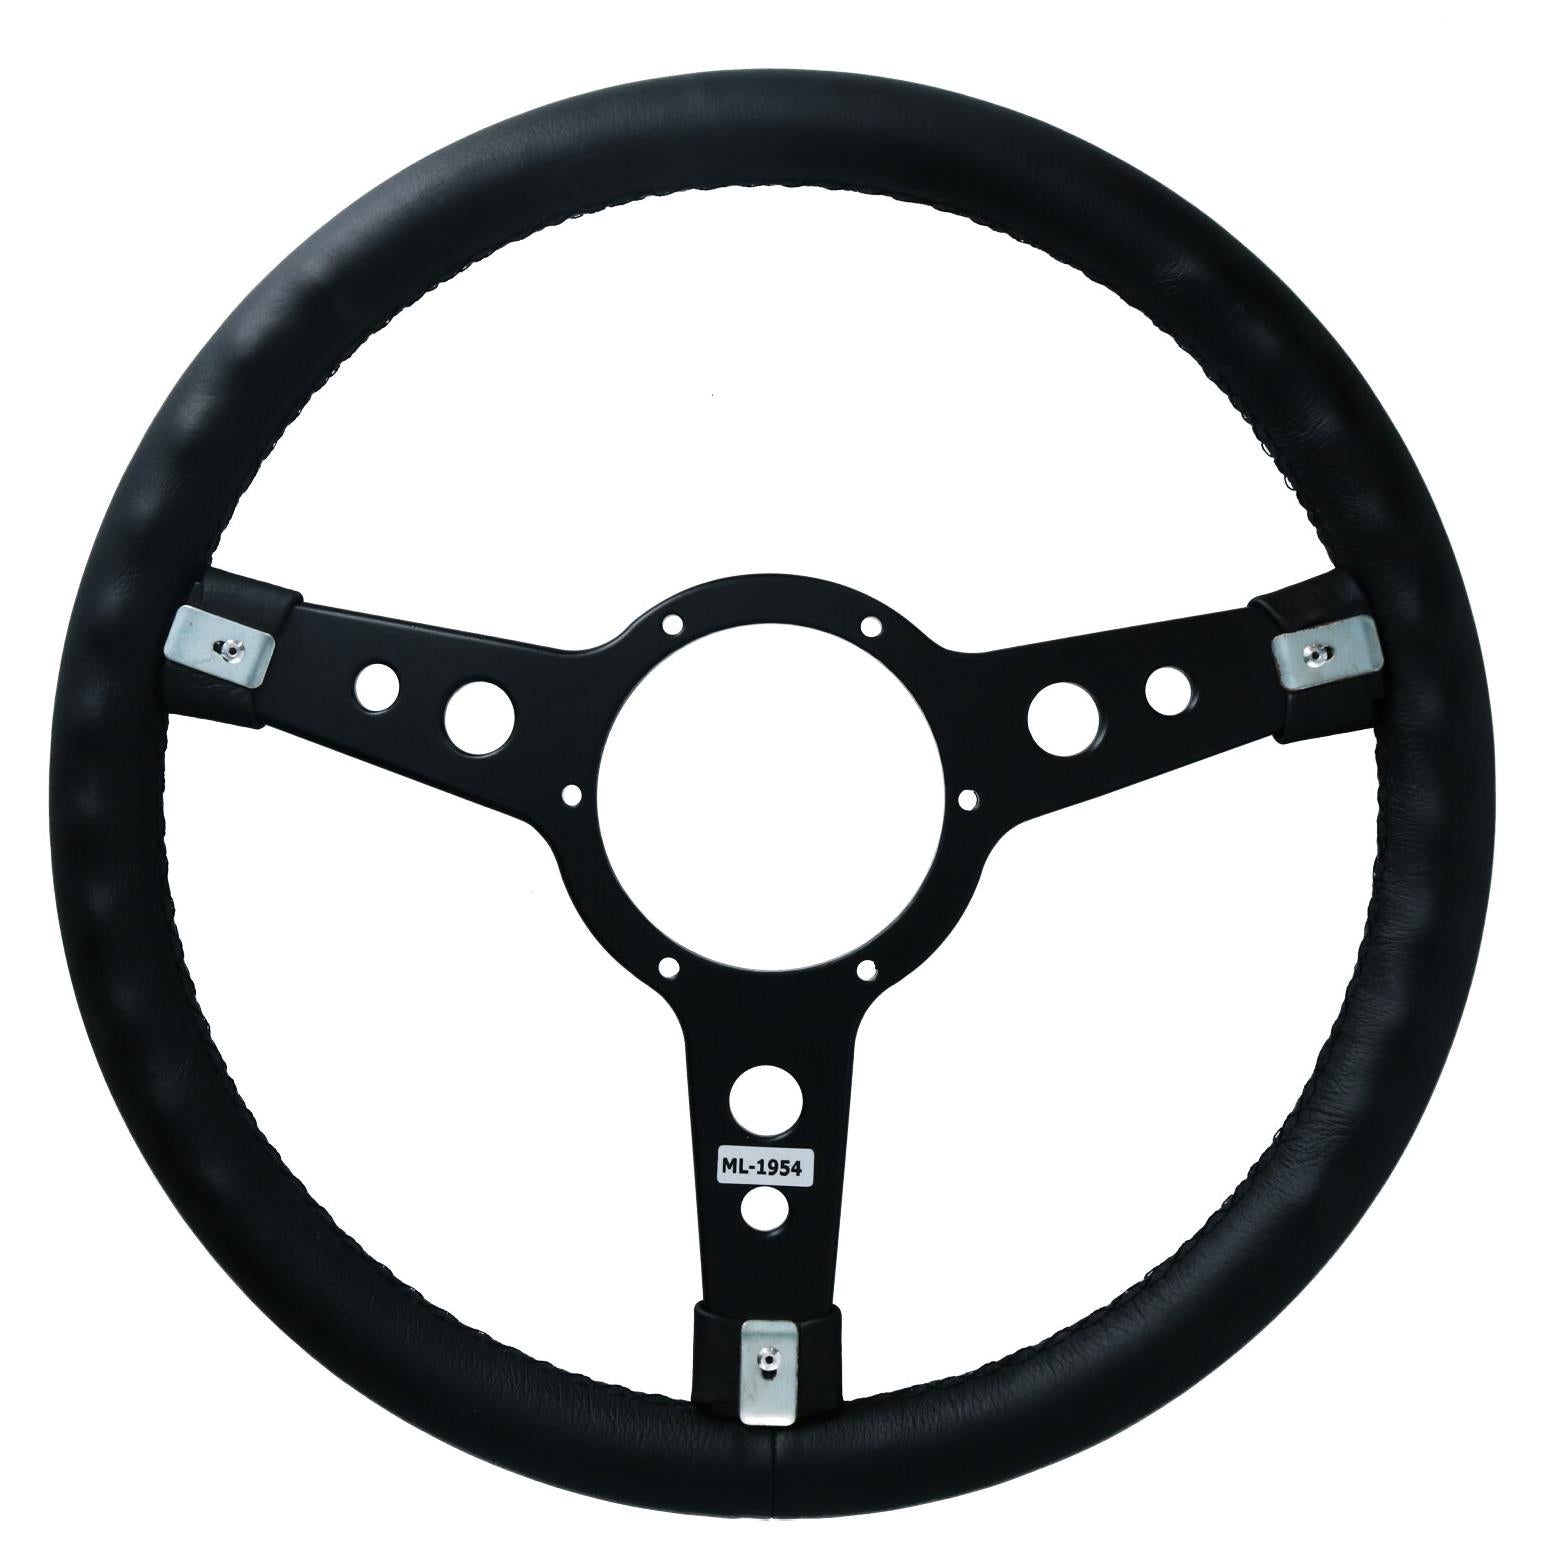 Traditional Classic Car Leather Steering Wheel & Boss MG - MGB -1970>